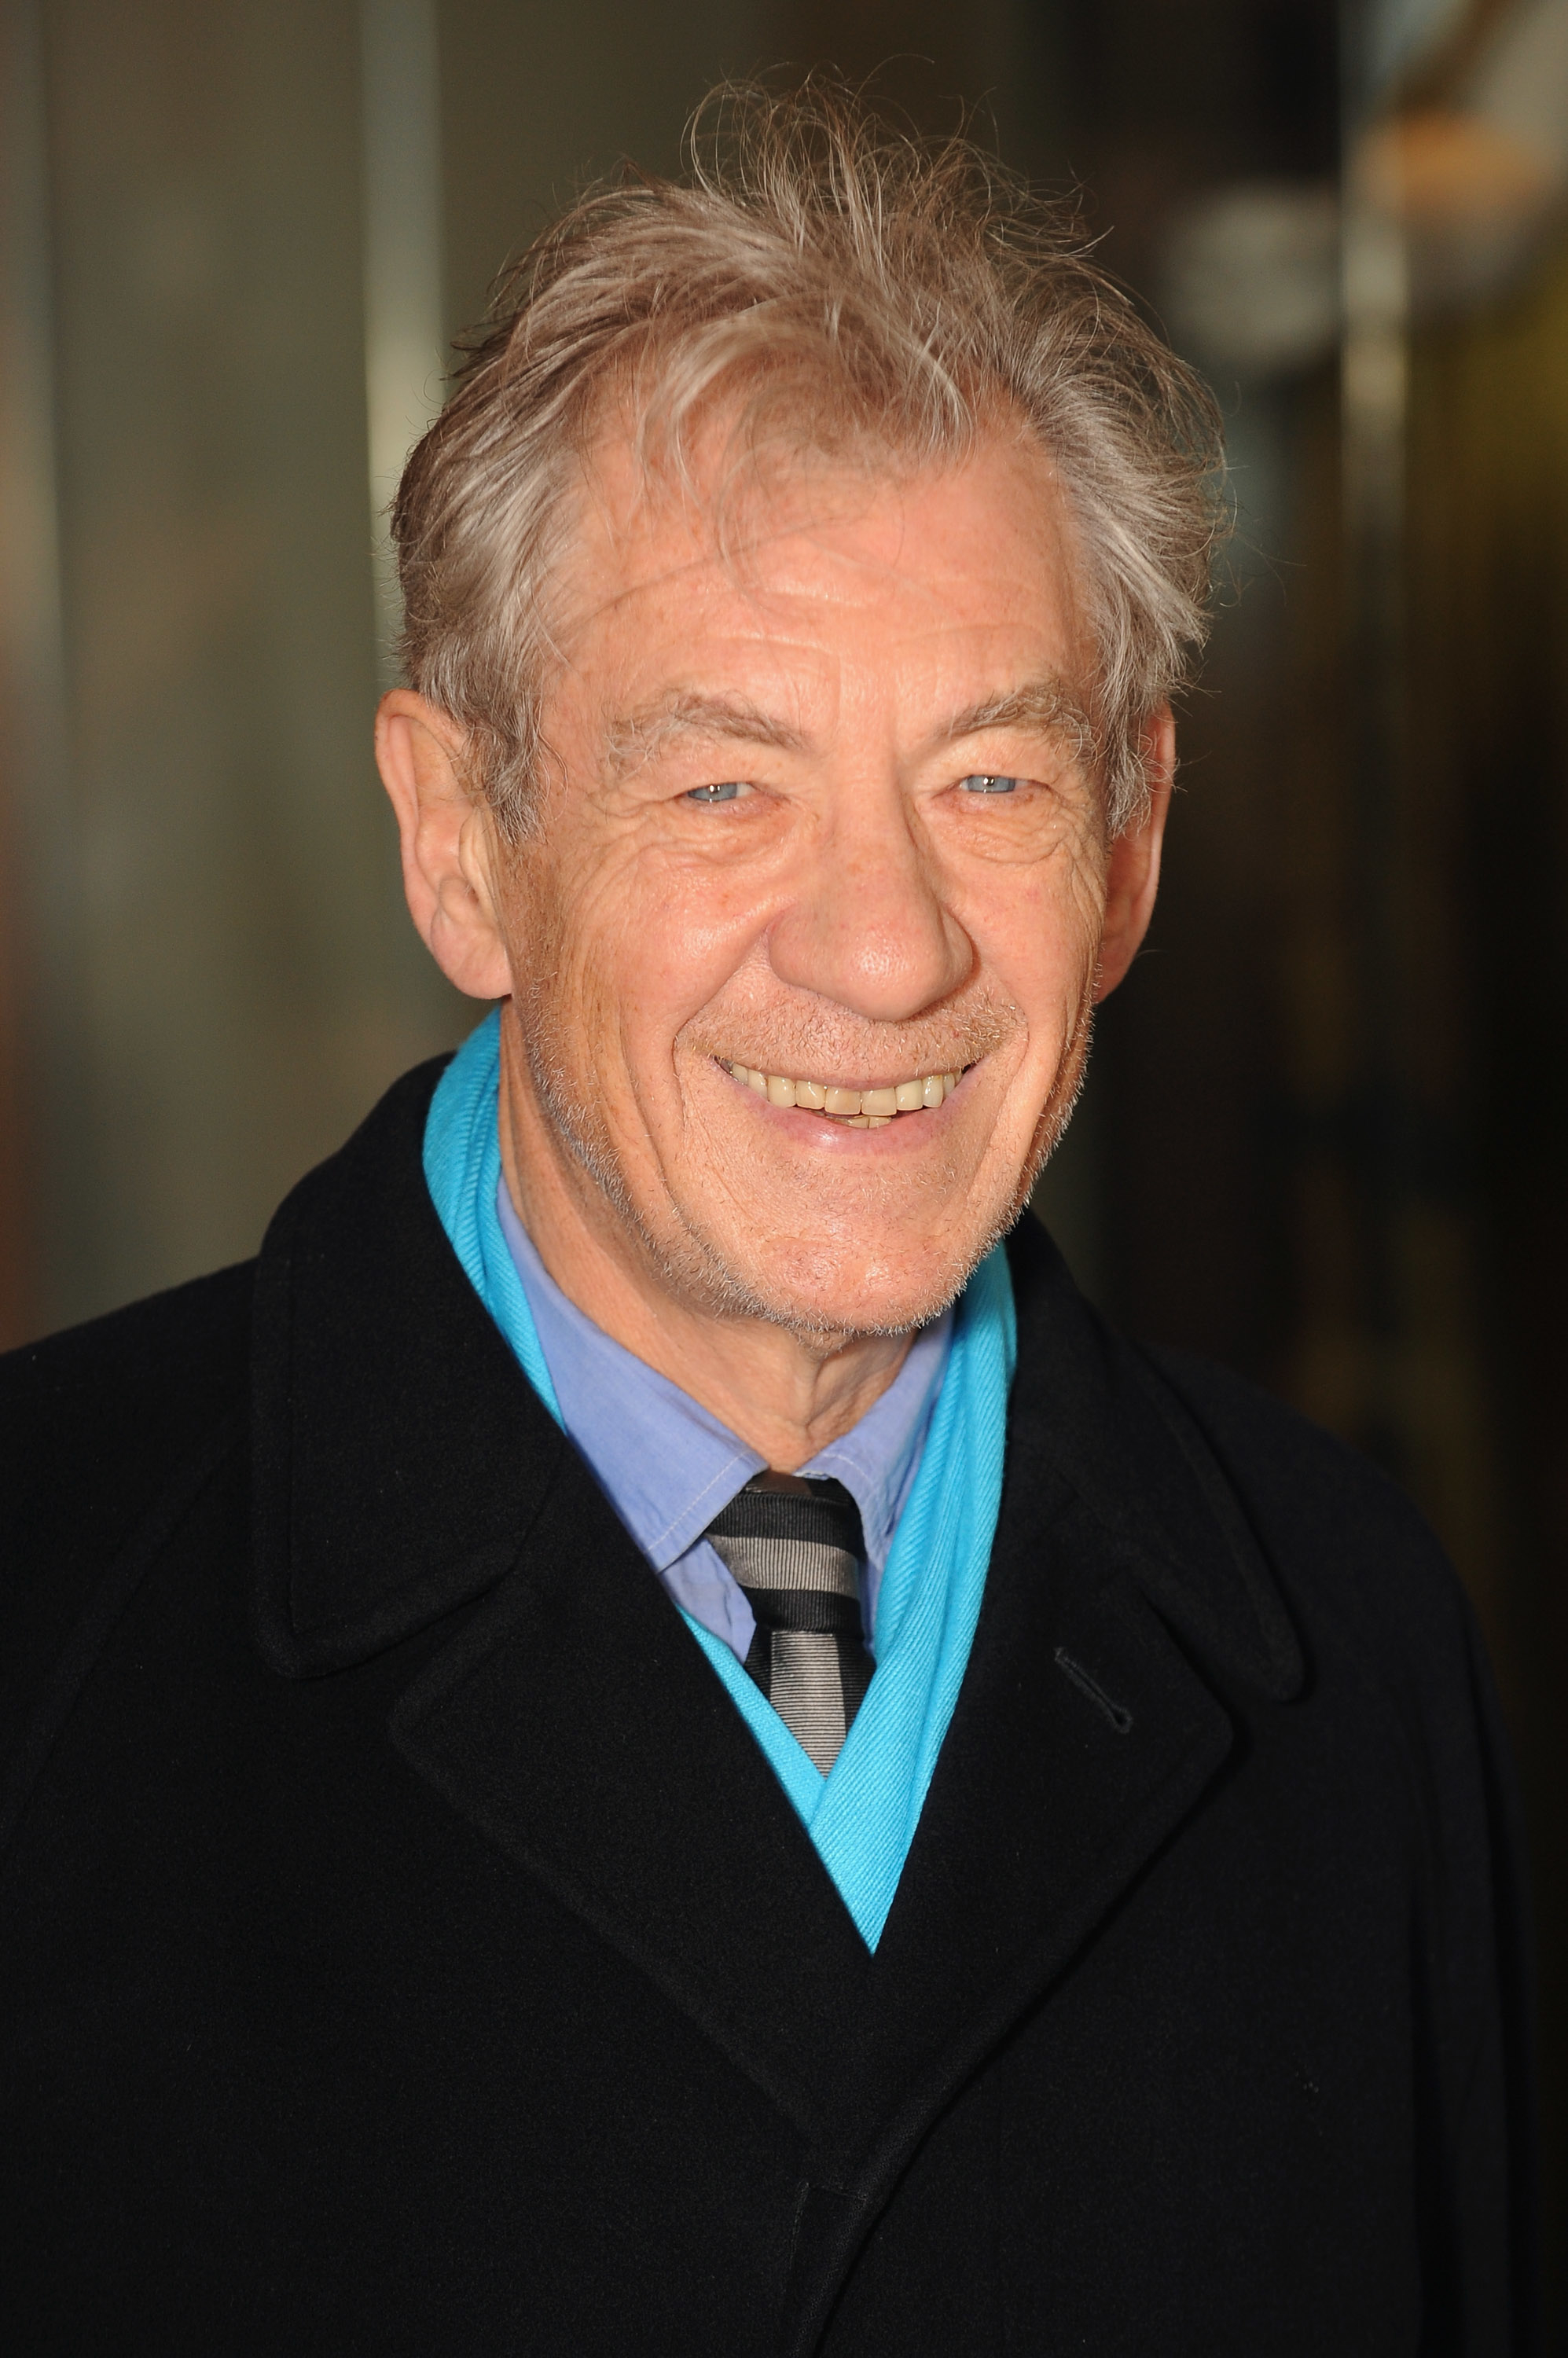 Sir Ian McKellen in a black coat and blue scarf, smiling at an event